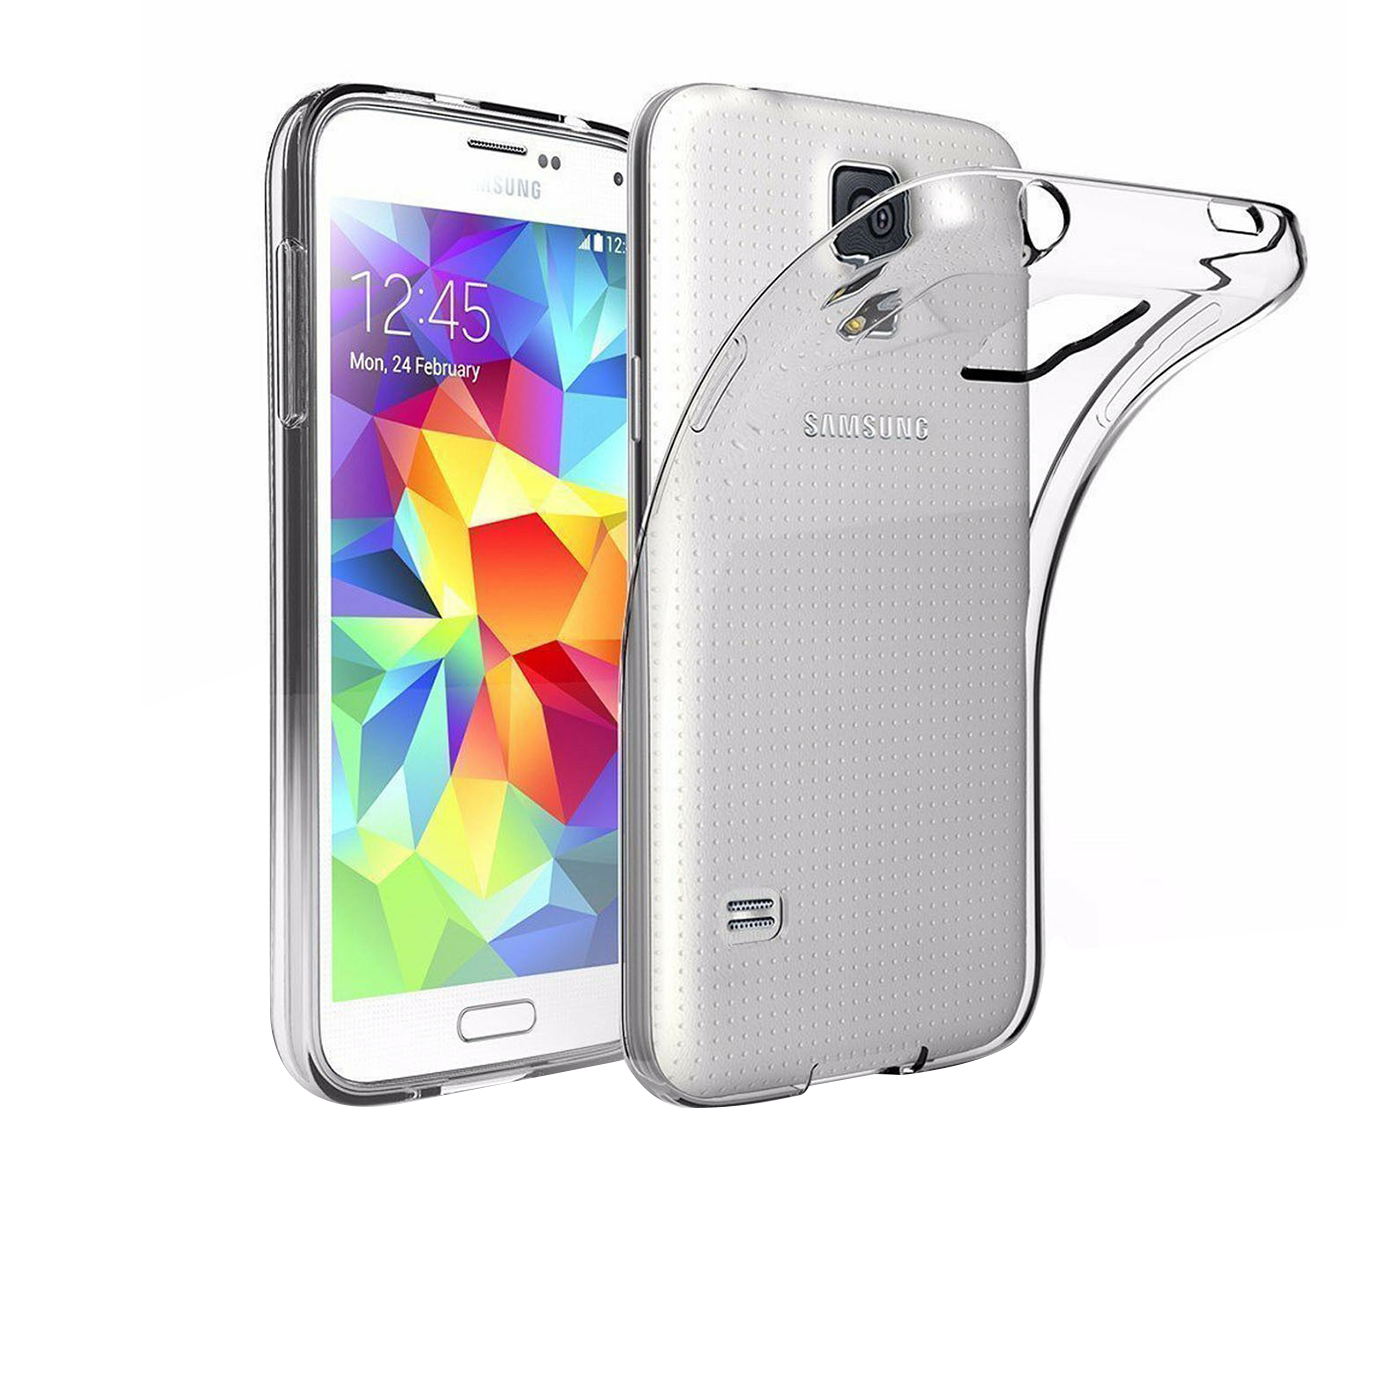 visie Motivatie Net zo Samsung Galaxy S5 Silicone Gel Case Clear TPU Transparent Slim Protective  Cover – emaxsave